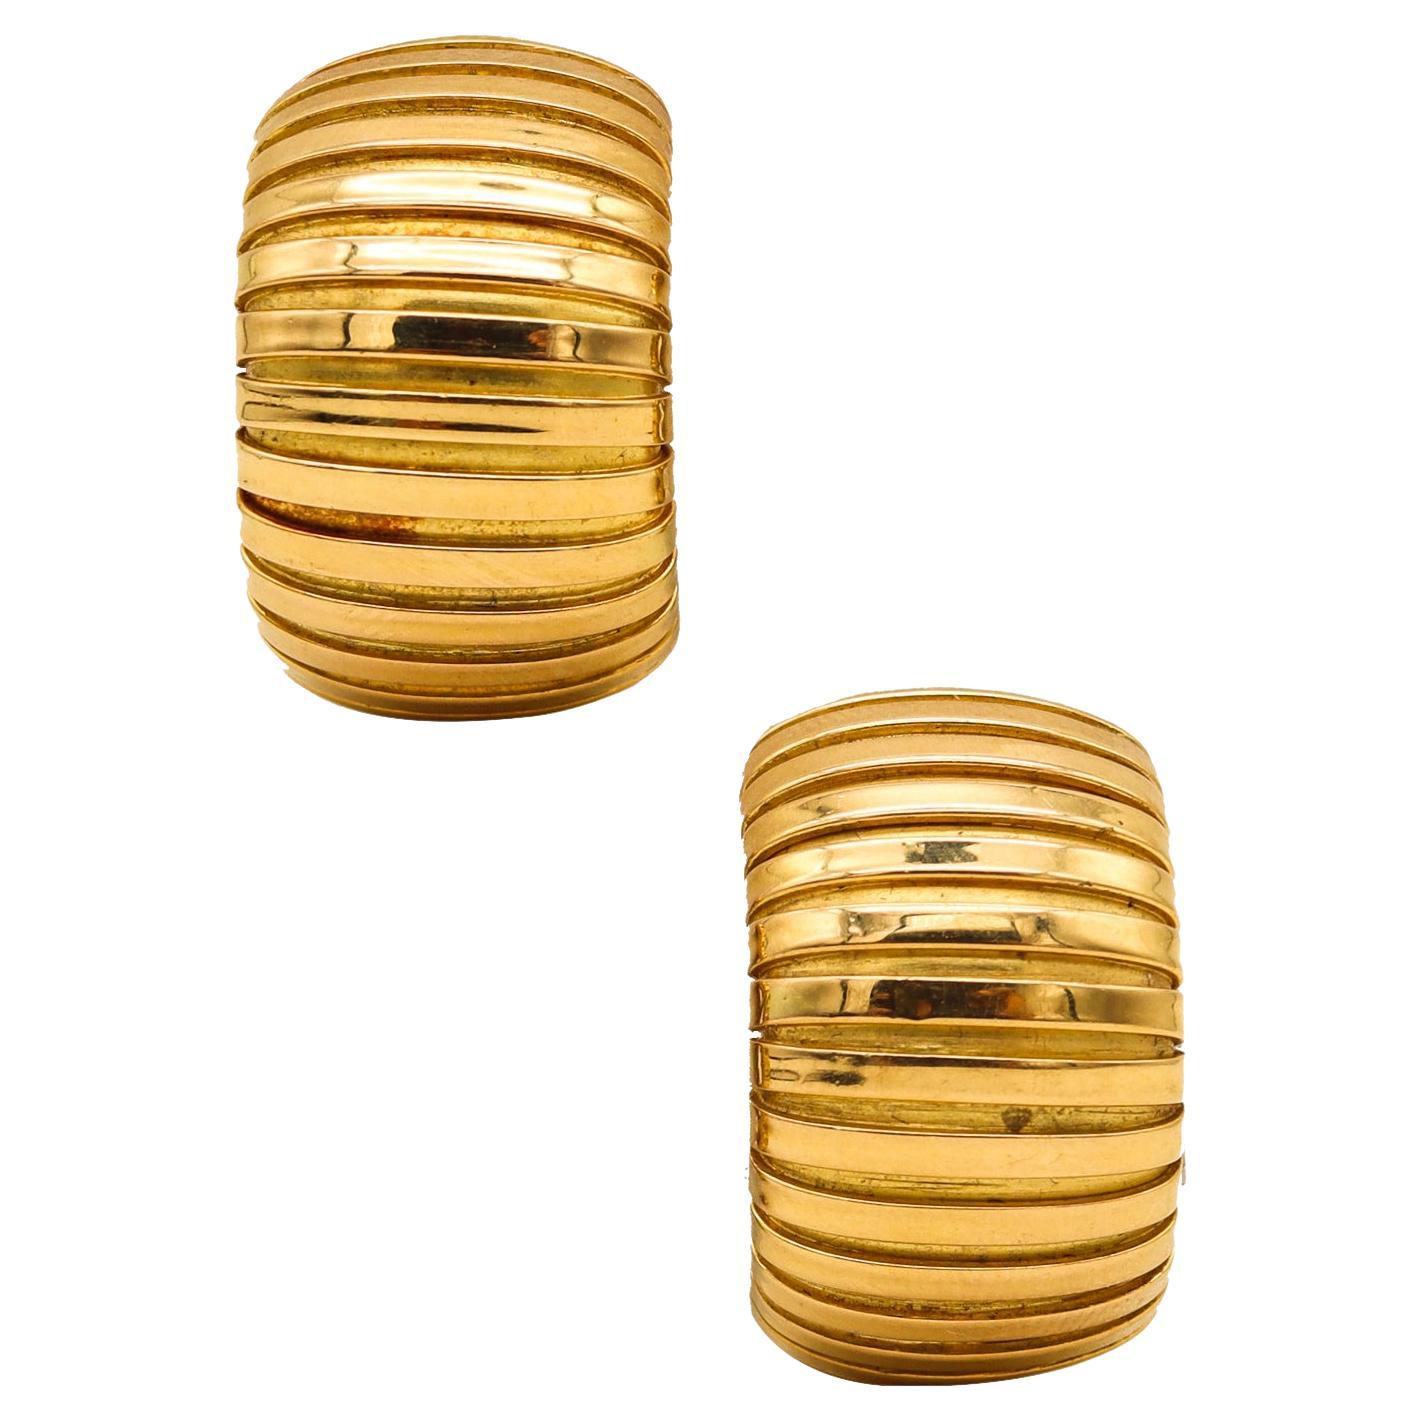 Carlo Weingrill 1970 Verona Tubogas Clips Earrings in Solid 18 Karat Yellow Gold